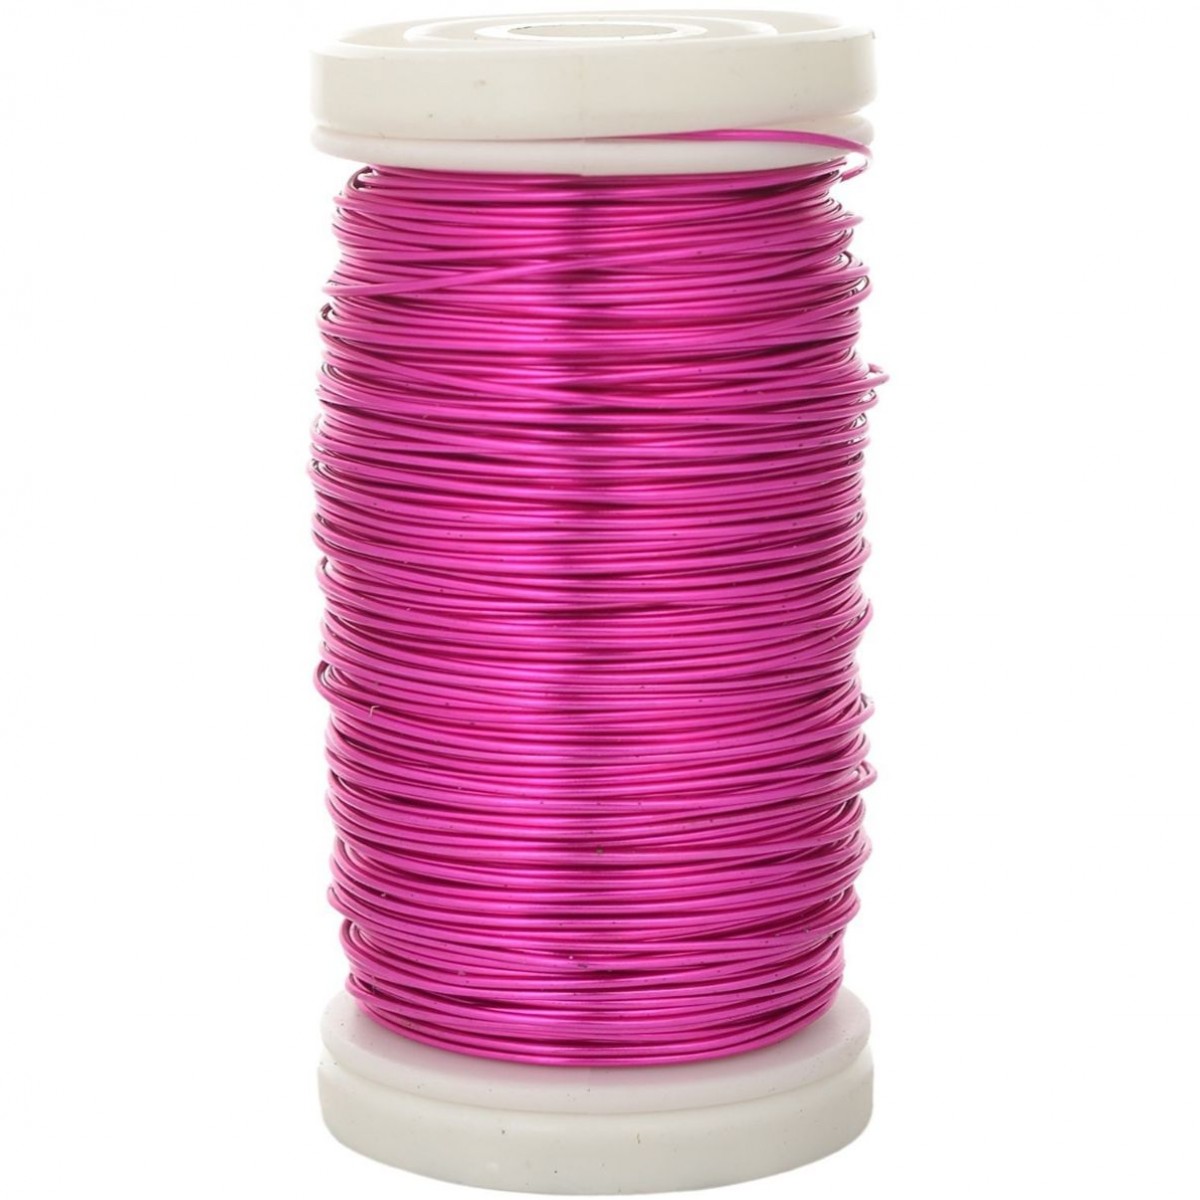 4086 Metallic Wire Strong Pink 24guage 50mtr 1 No